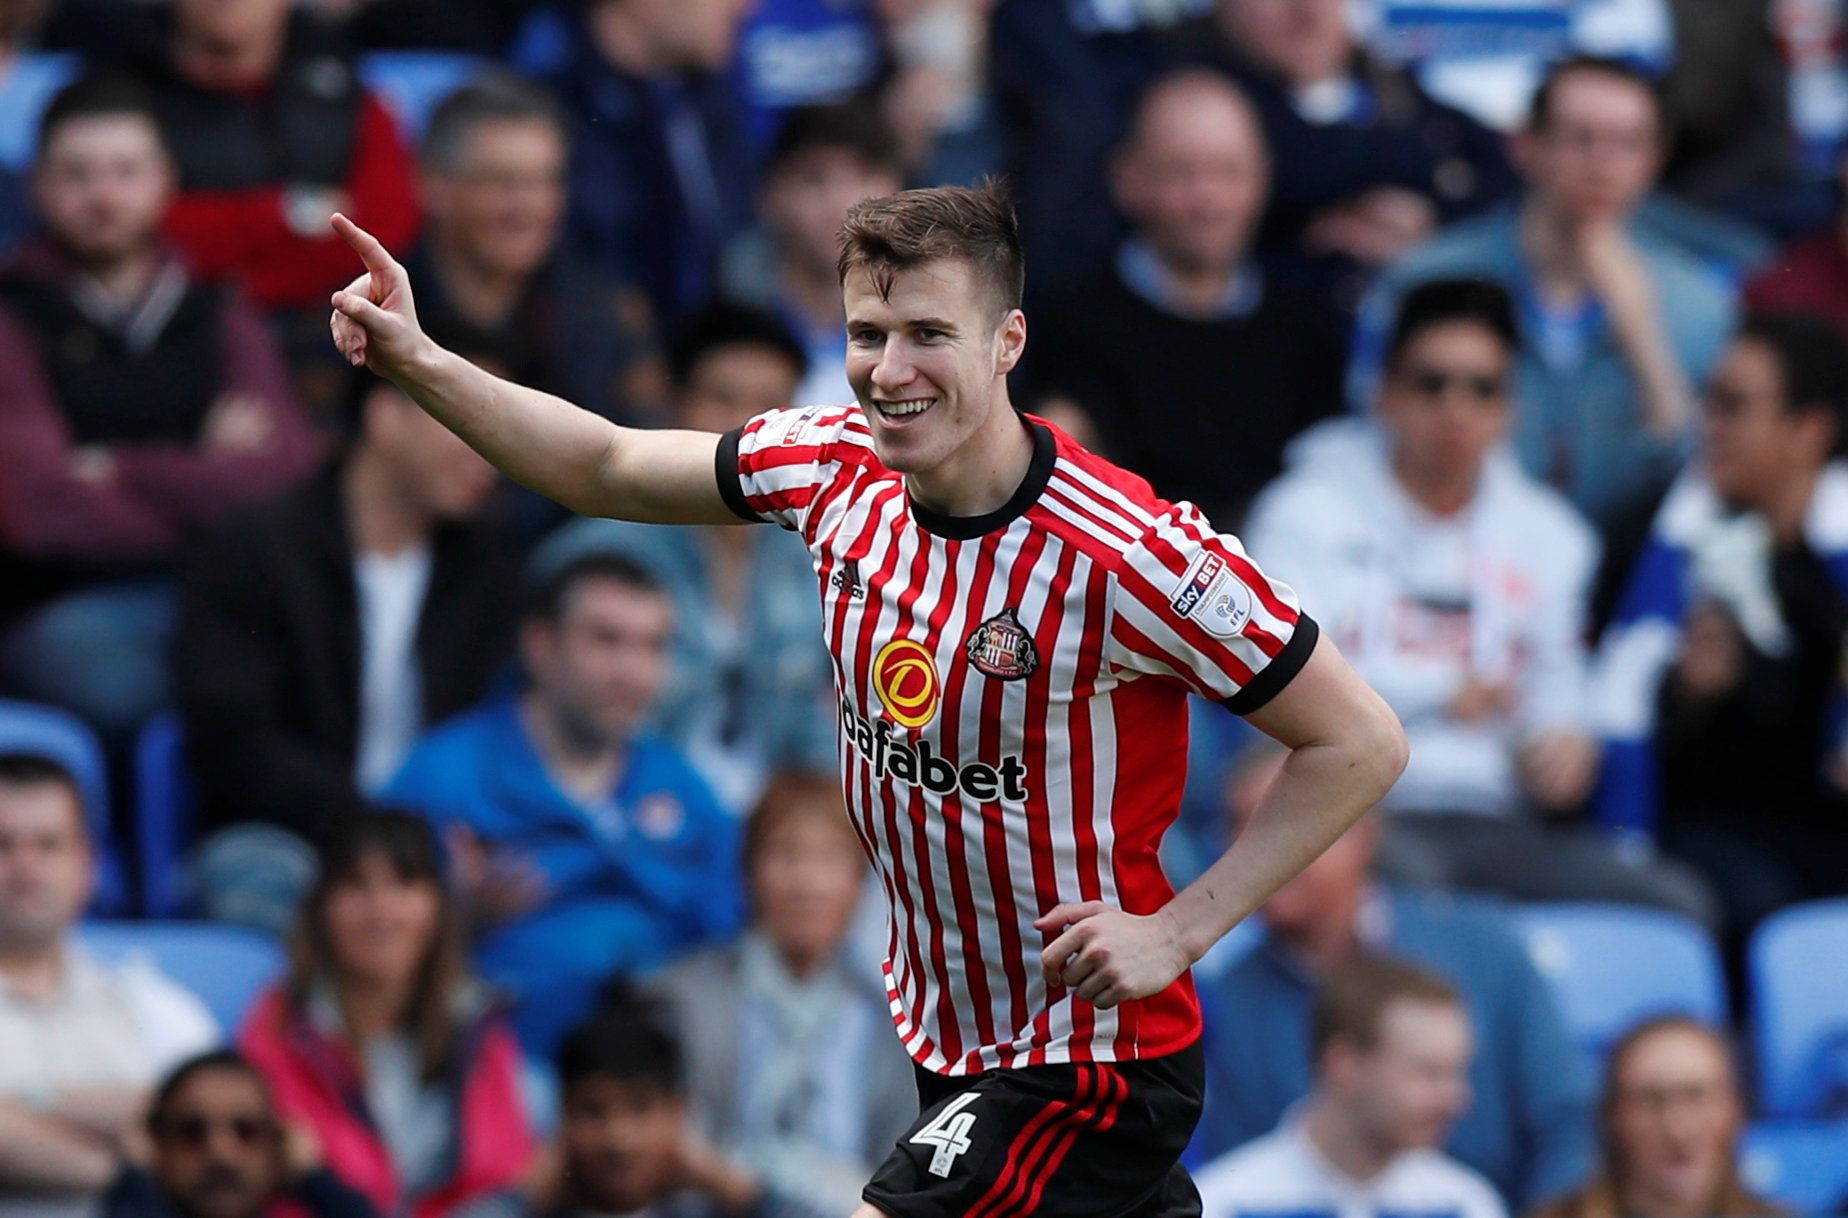 Soccer Football - Championship - Reading vs Sunderland - Madejski Stadium, Reading, Britain - April 14, 2018   Sunderland's Paddy McNair celebrates scoring their first goal   Action Images/Peter Cziborra    EDITORIAL USE ONLY. No use with unauthorized audio, video, data, fixture lists, club/league logos or 